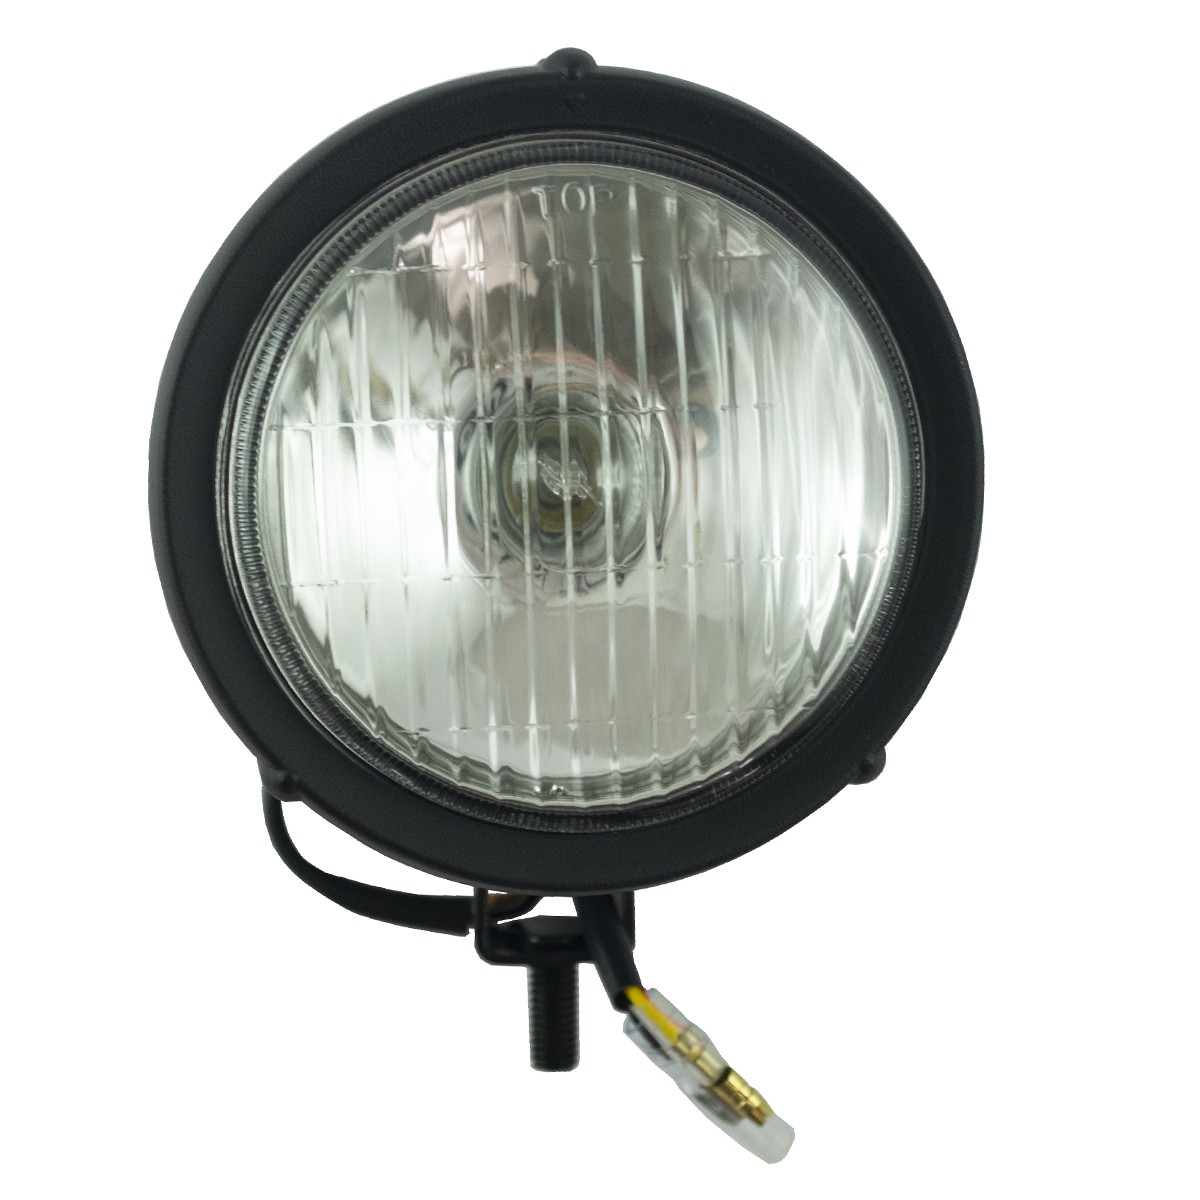 Lampa robocza / 12V/27W / LS MT1.25 / LS MT3.35 / LS MT3.40 / LS MT3.50 / LS MT3.60 / TRG760 / A1760028 / 40006999 / 40372309